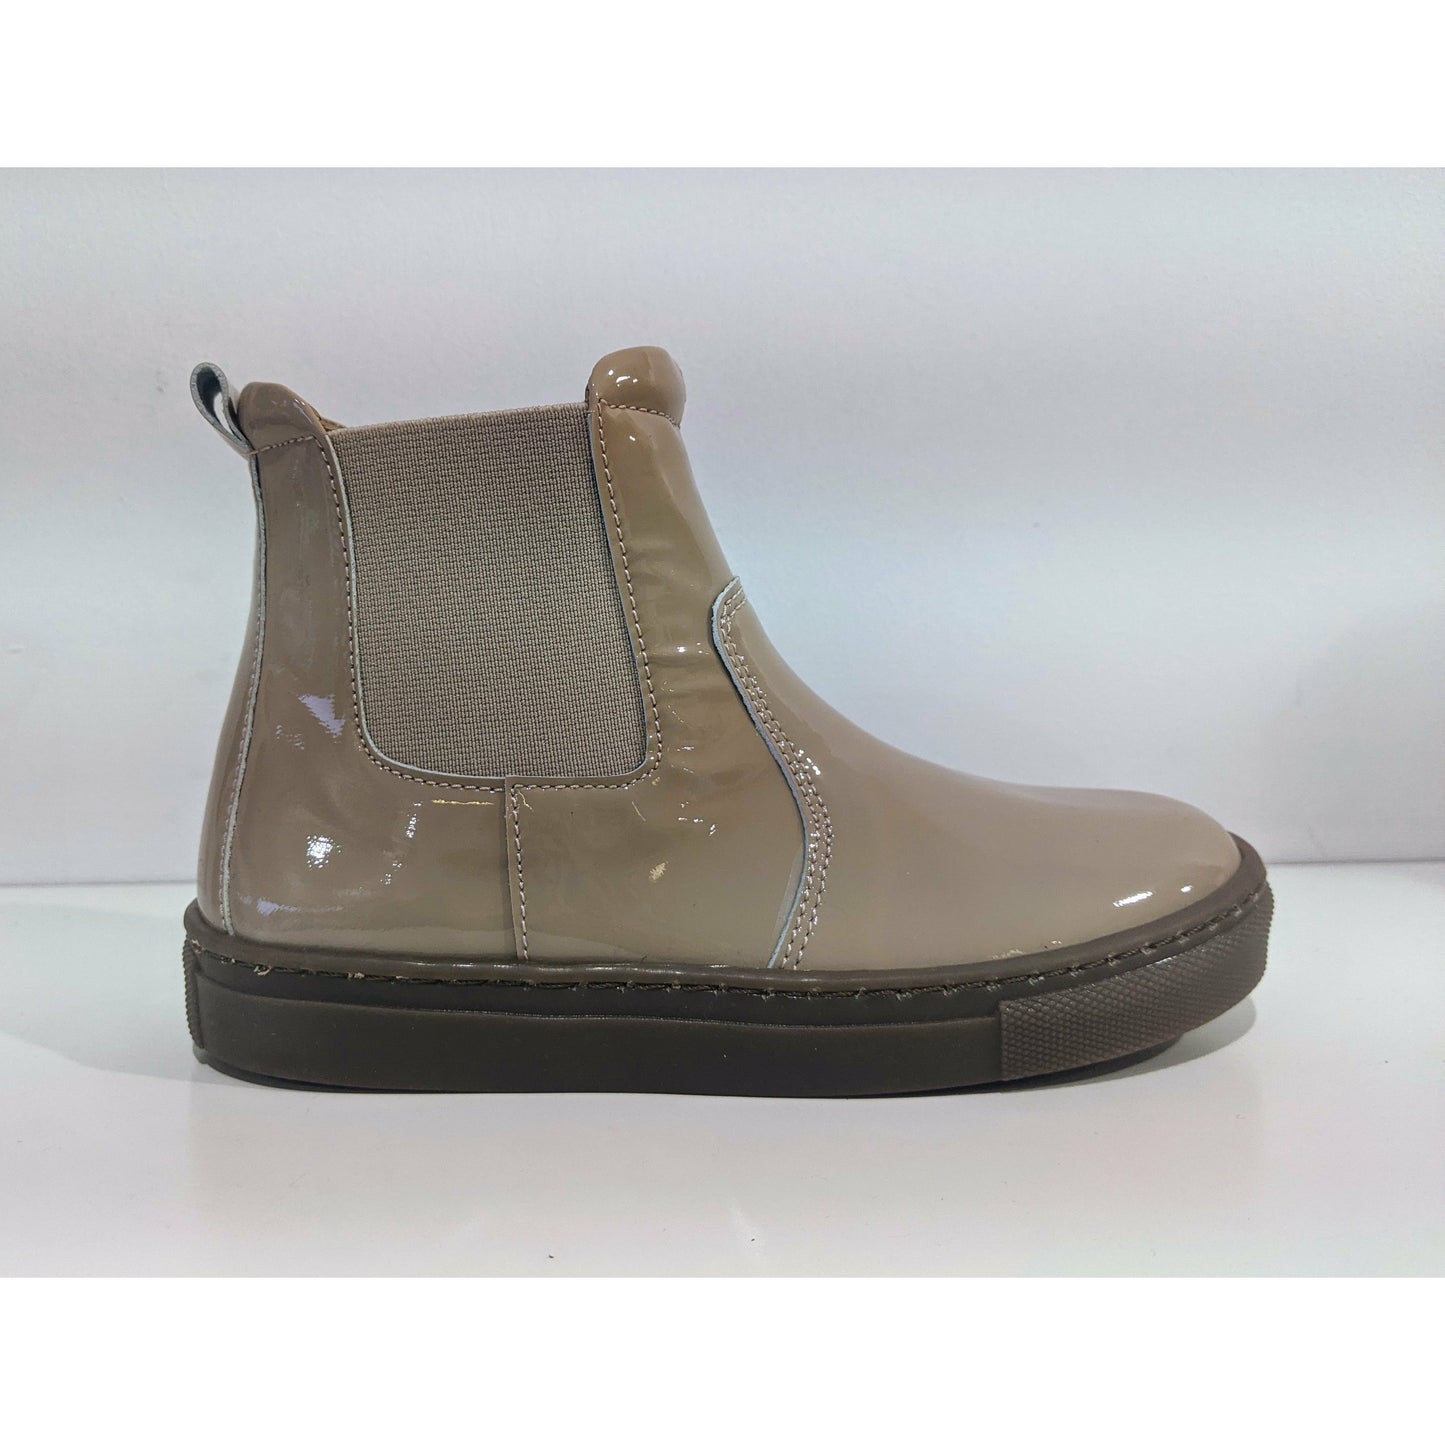 A Girls ankle boot by Petasil, style Candy, in nude patent with self coloured elastic panel, inside zip fastening. Right side view.